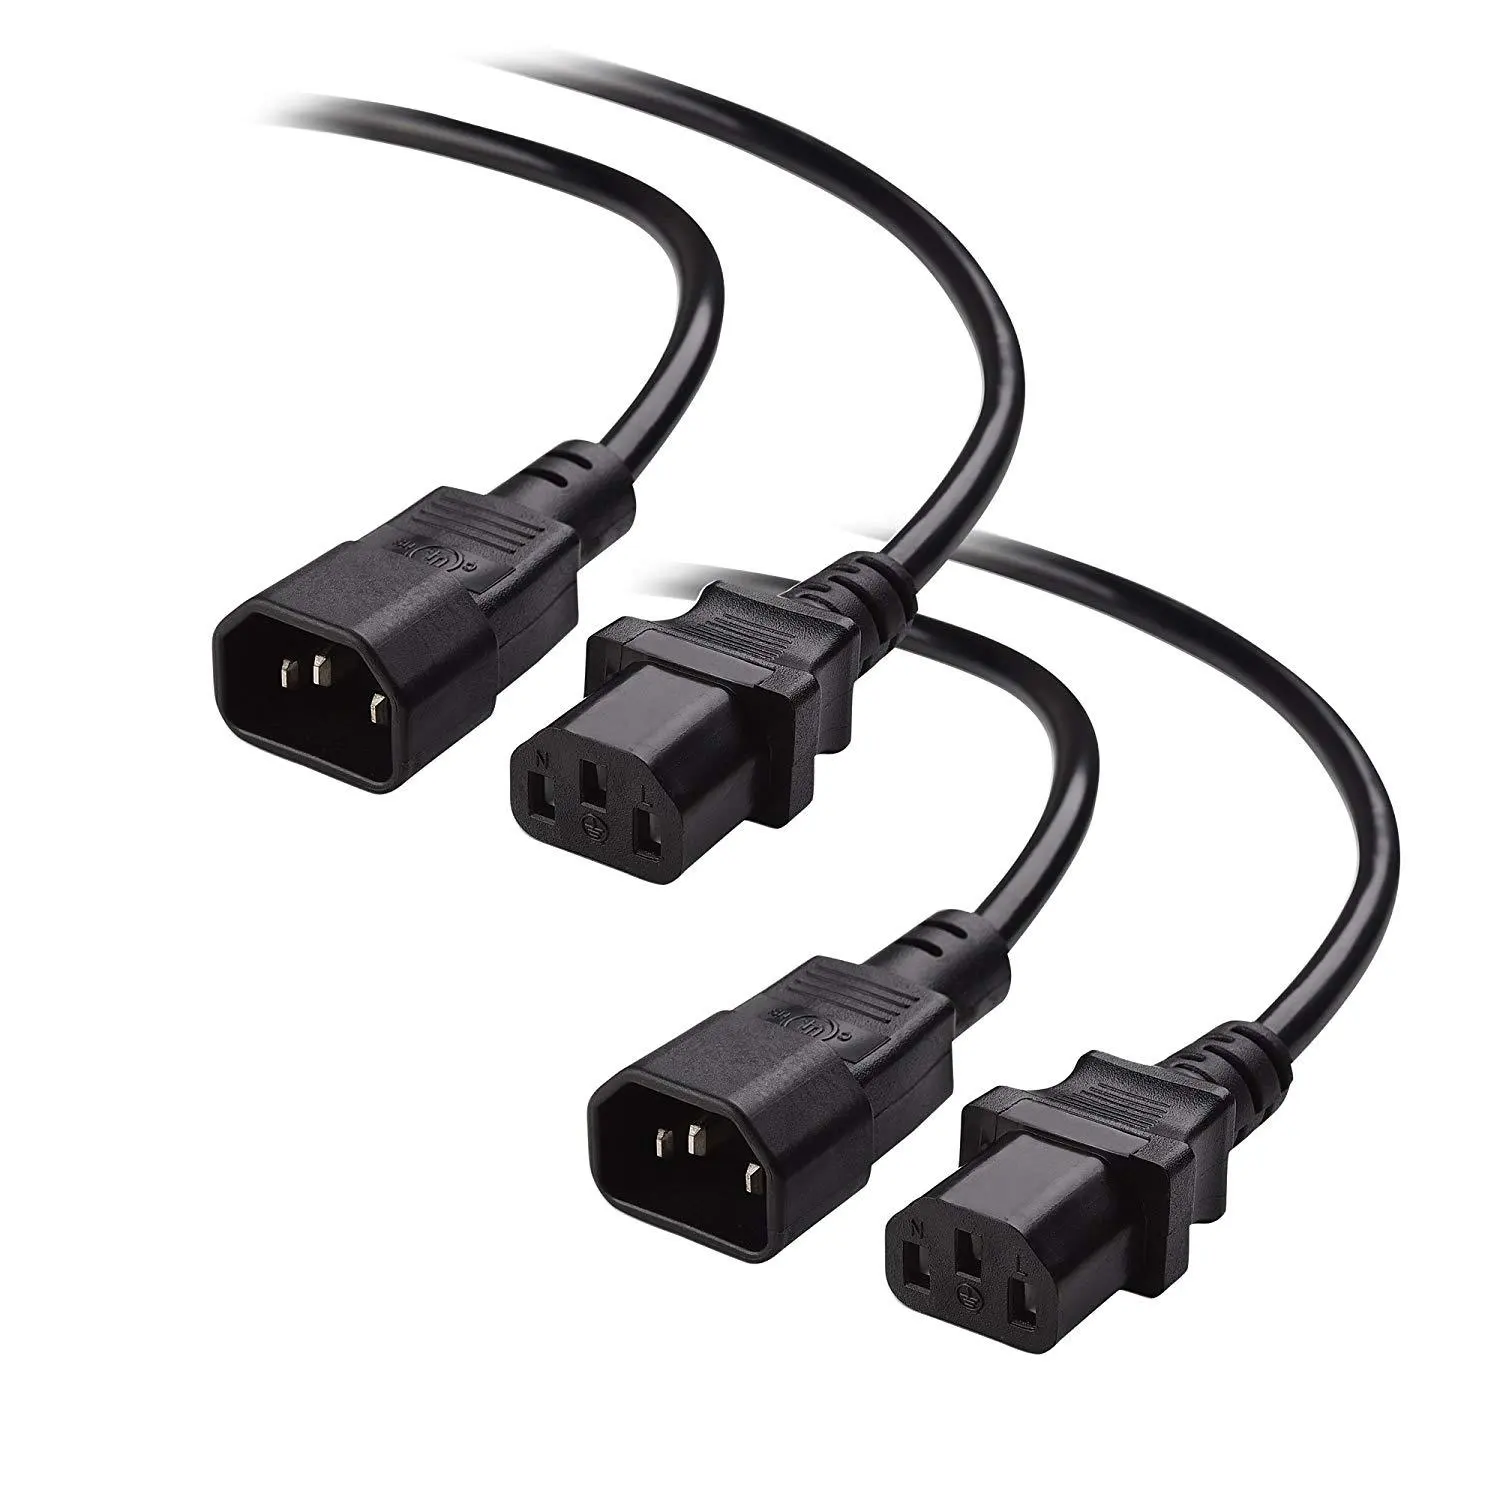 Supply Server PSU PDU power cord C13 to C14 power extension cord Switch connection cable C13 to C14 male to female power cable